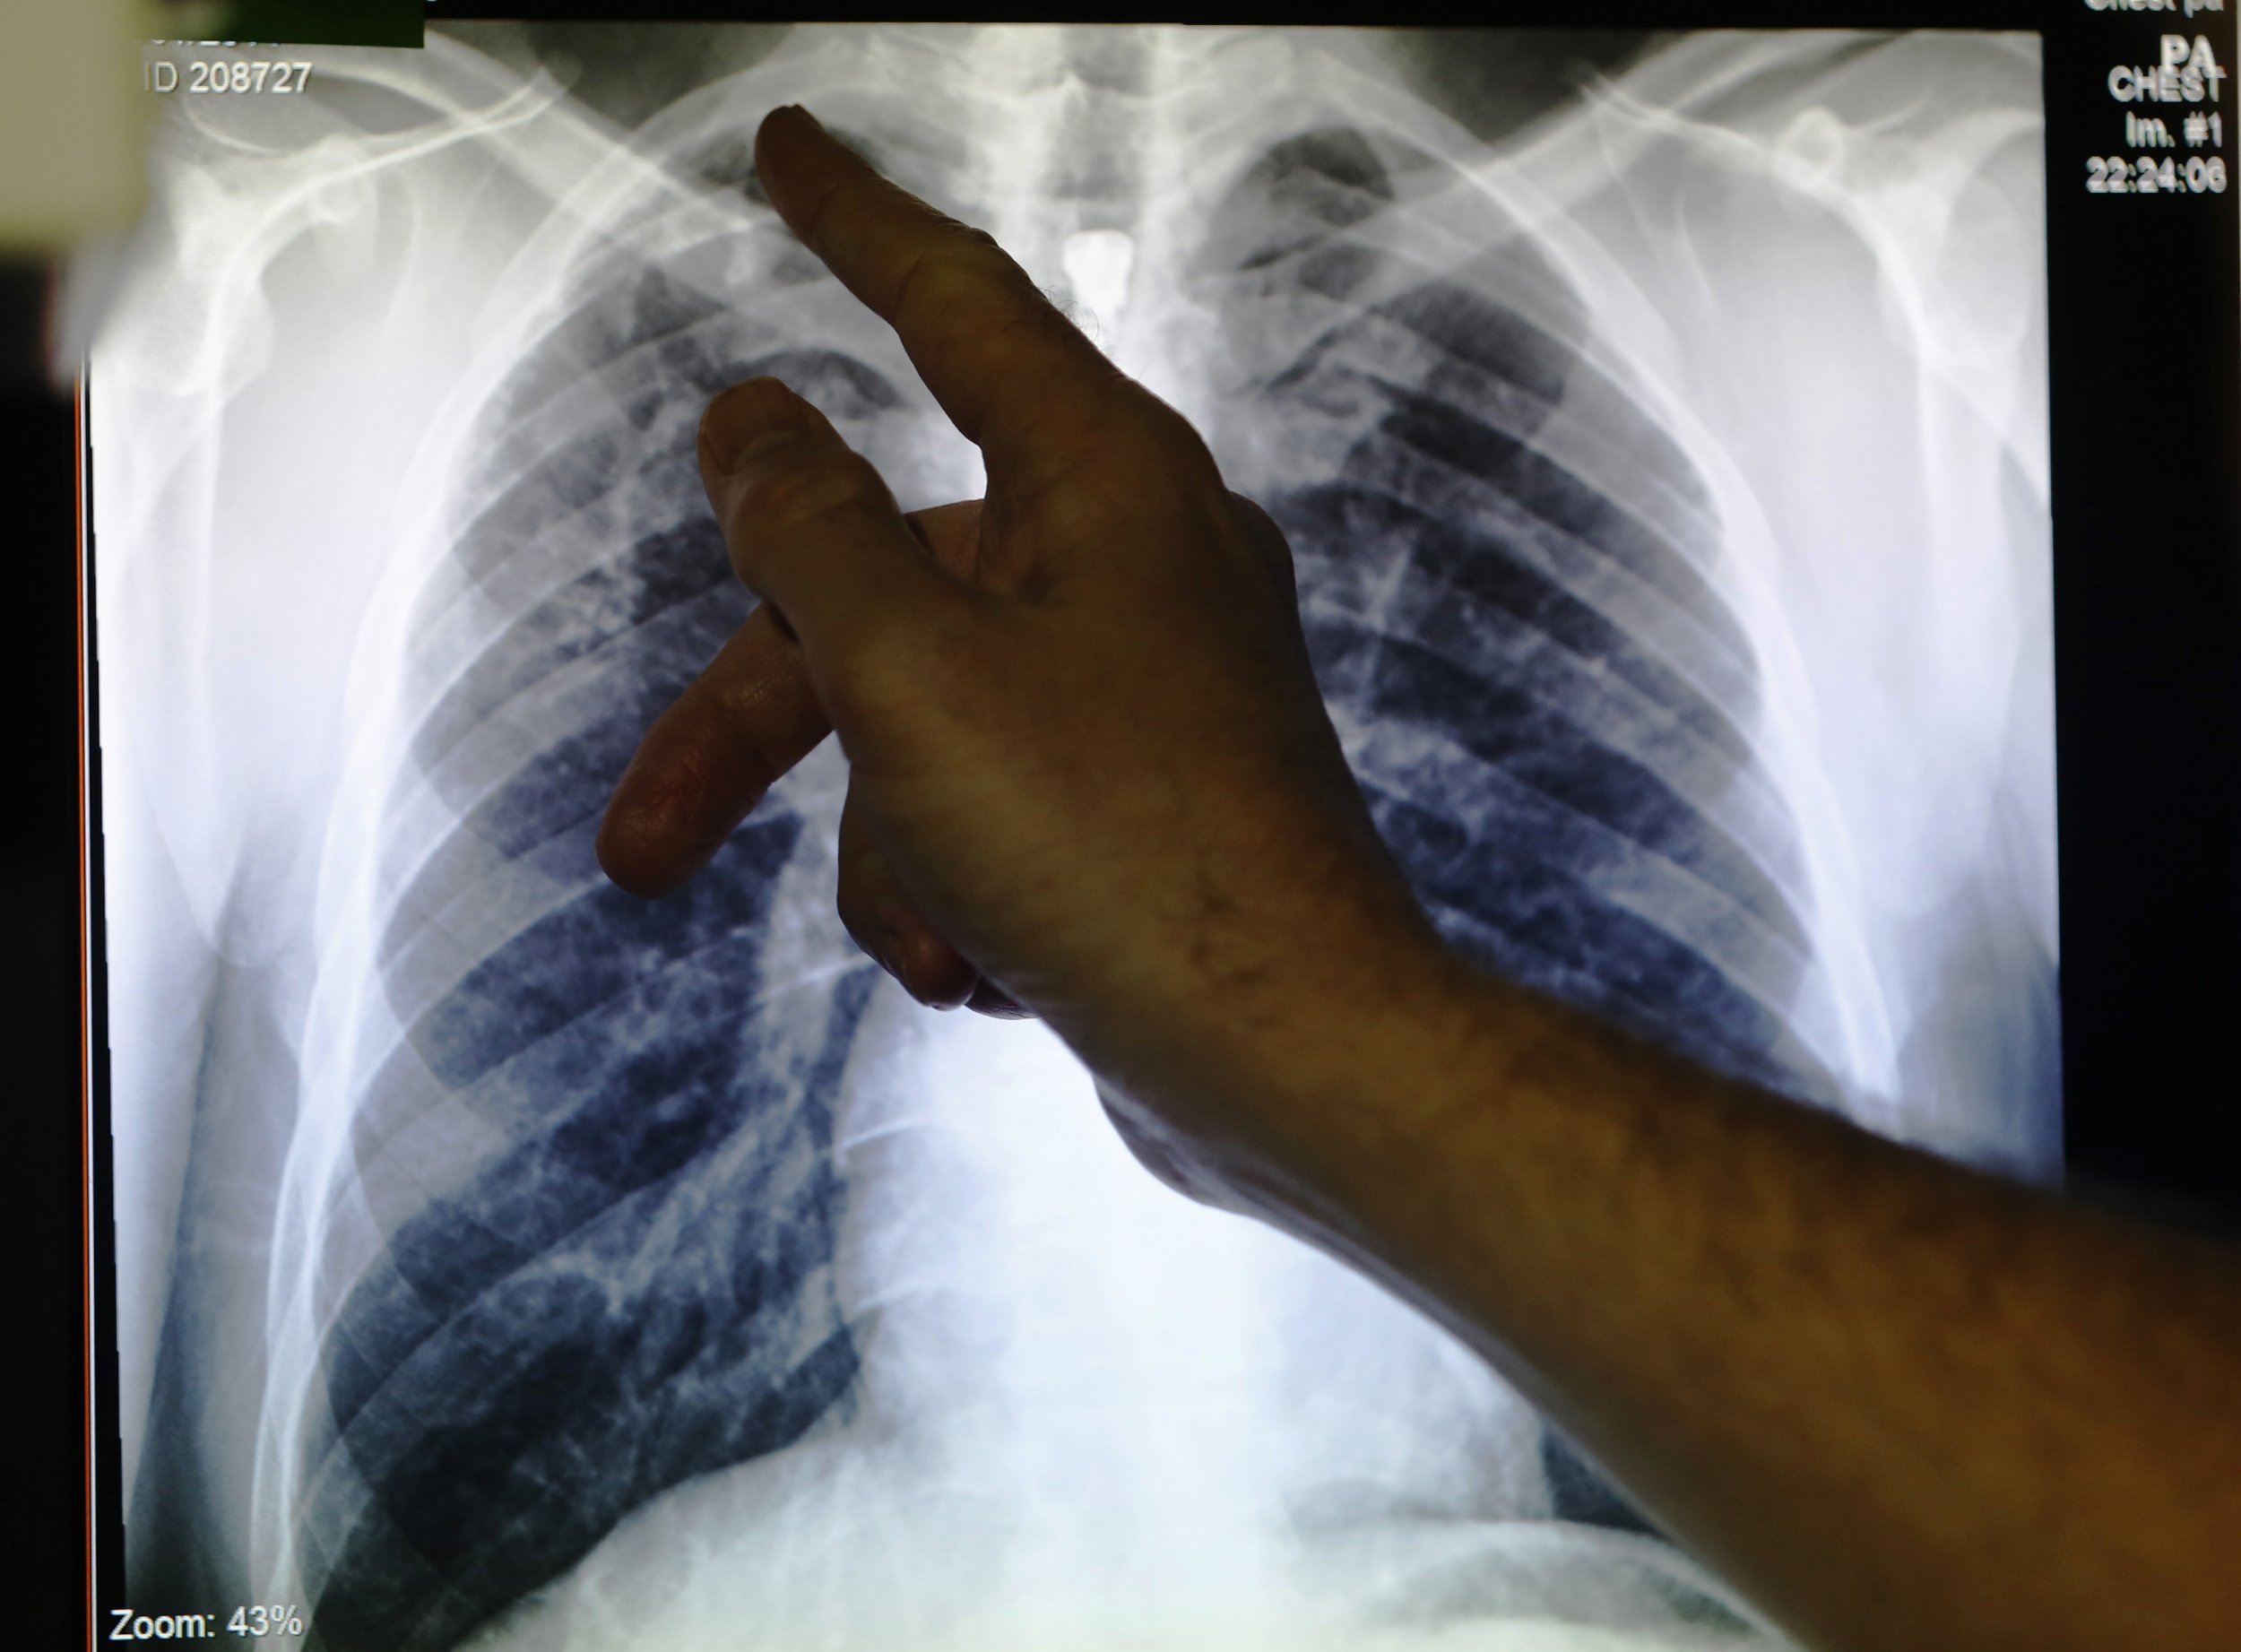 Lungs infected with TB